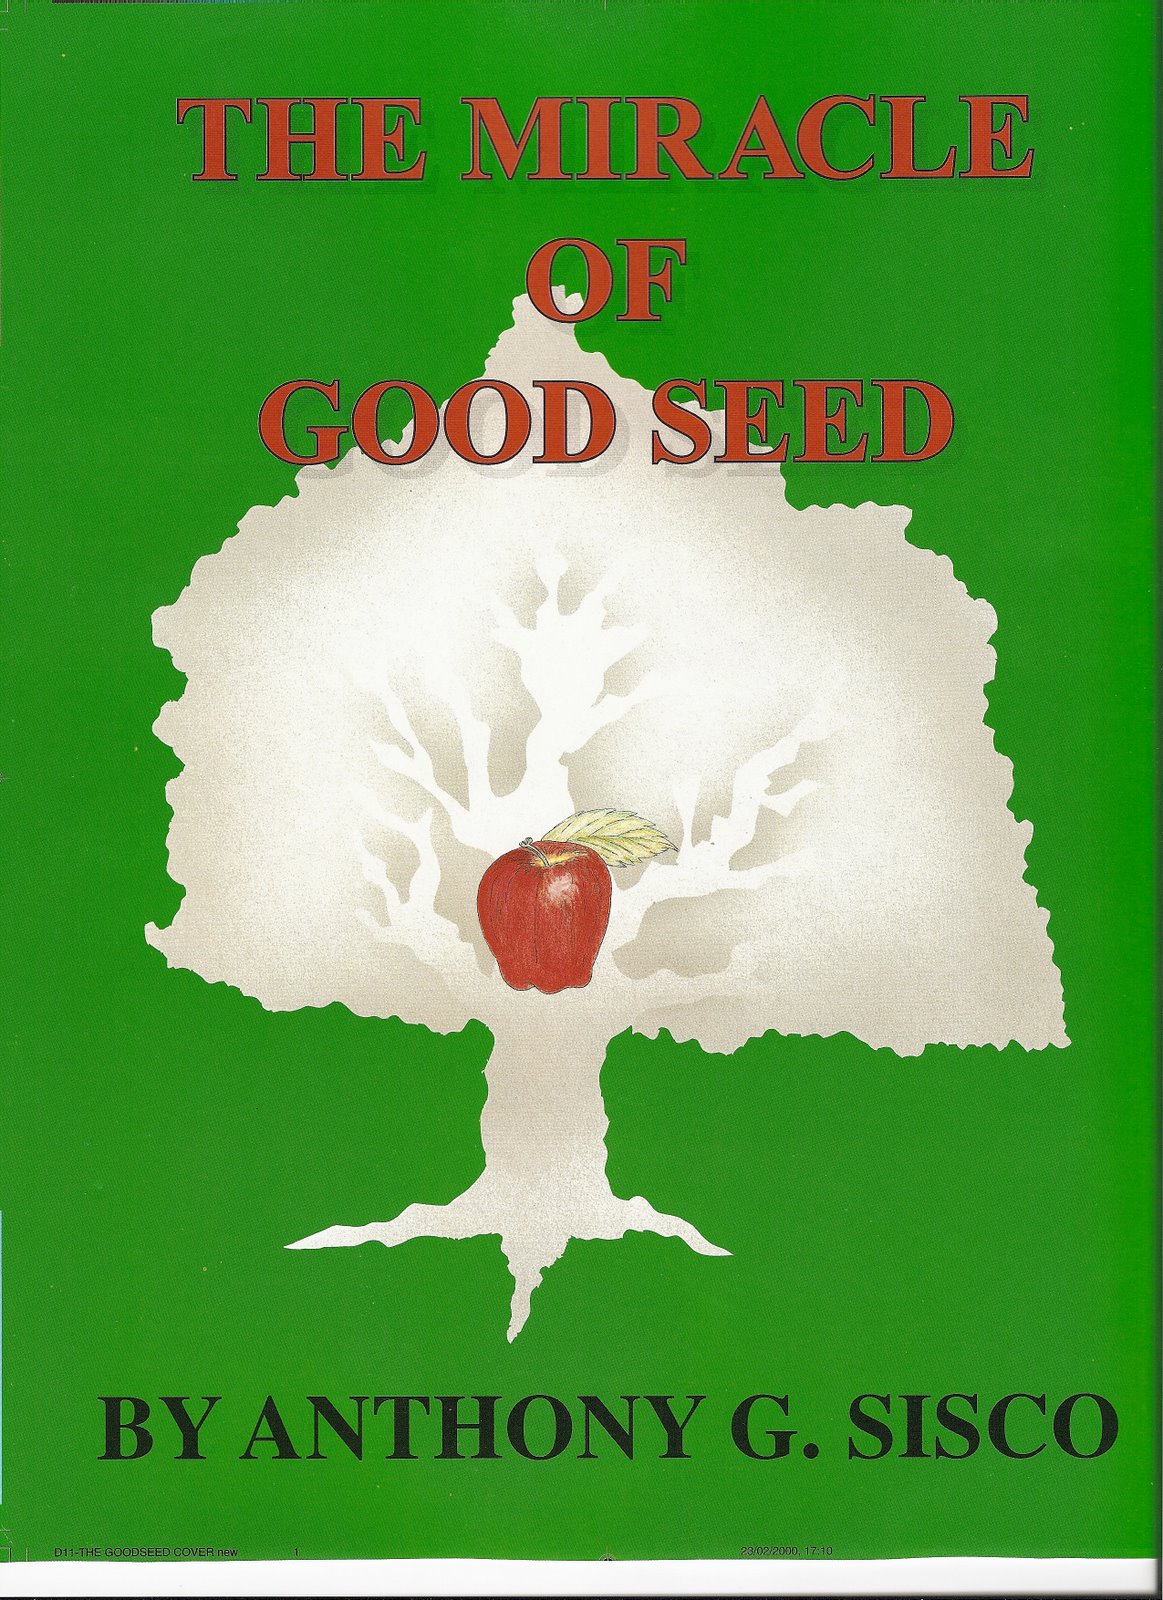 Miracle of Good Seed